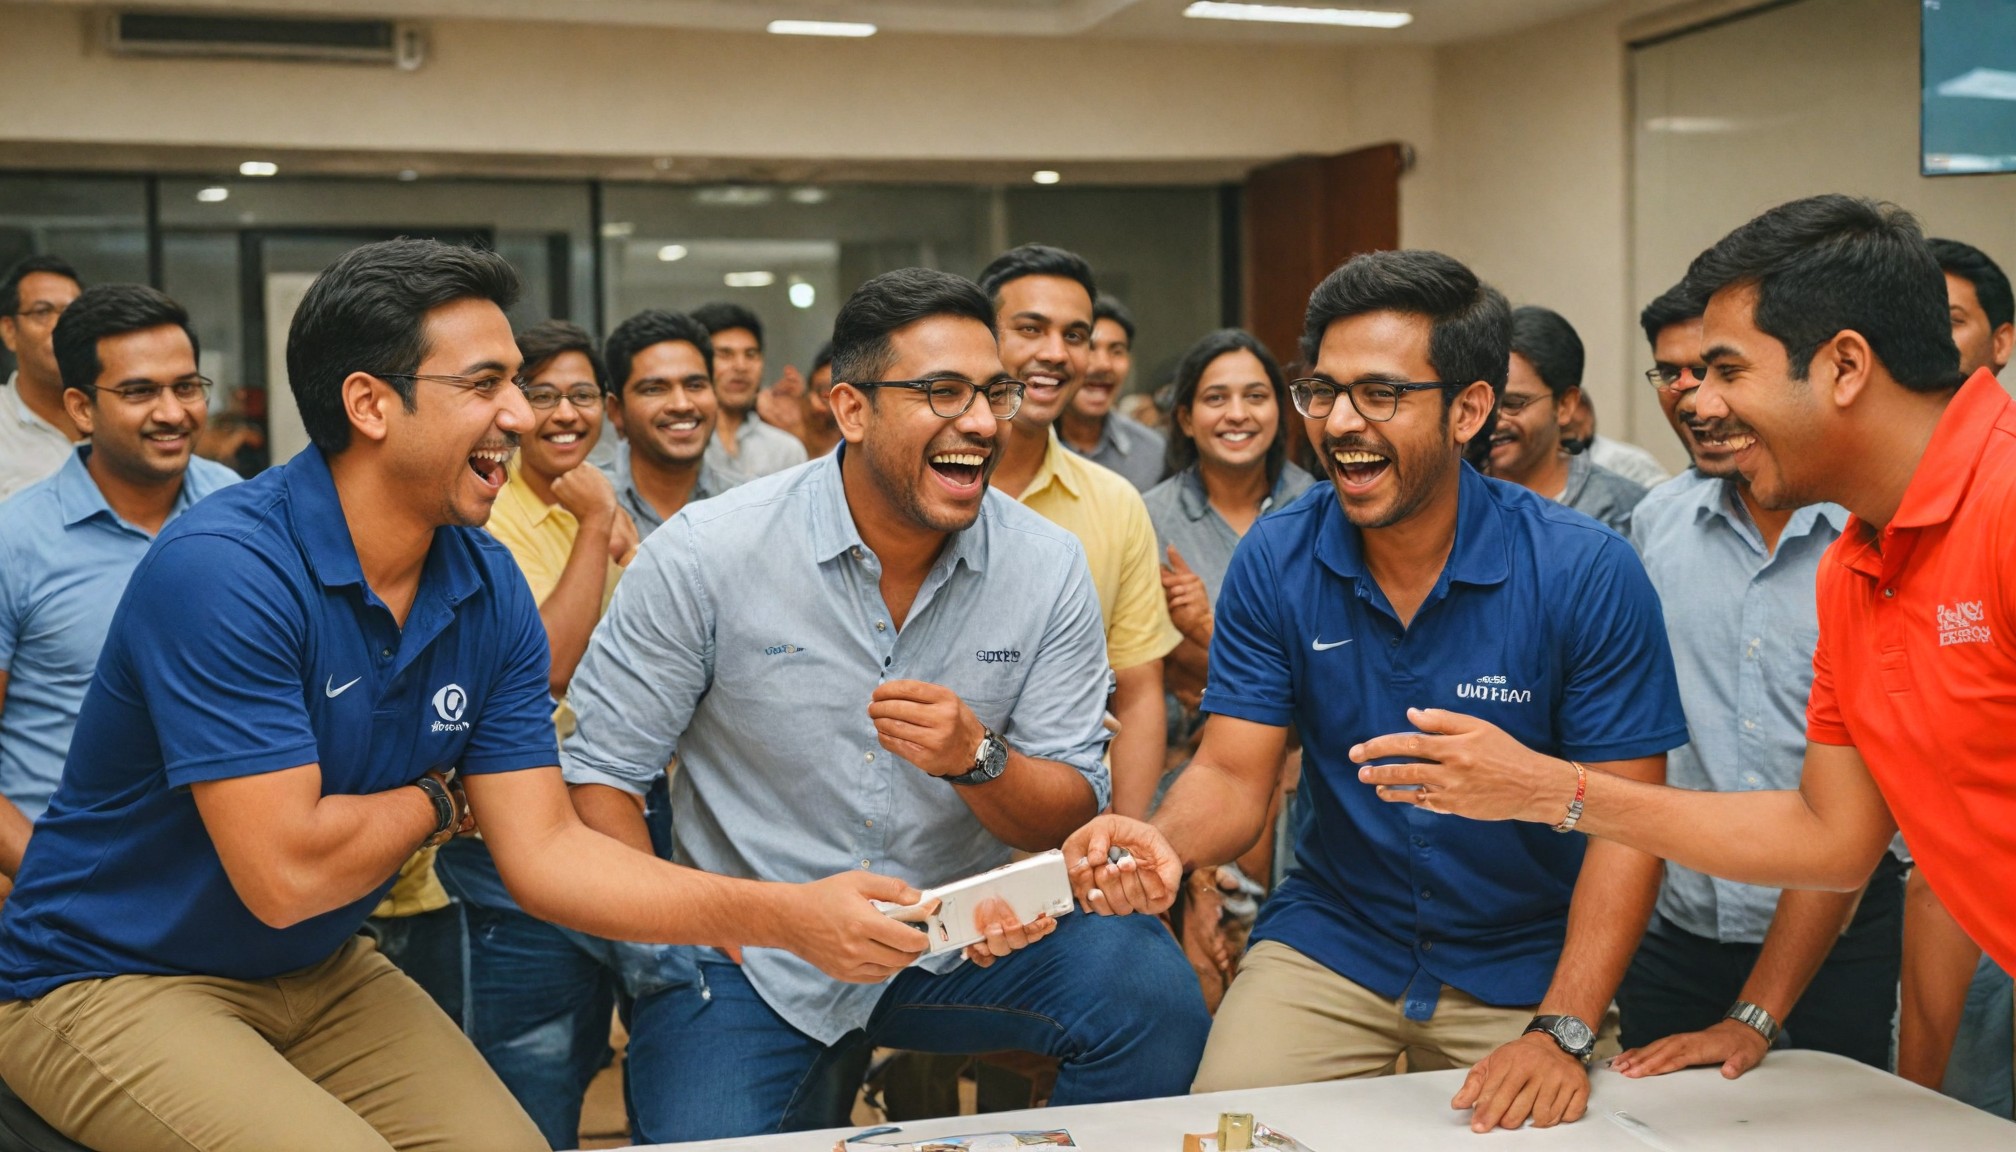 Team bonding and laughter during a fun Friday activity at Mileage Global's indoor team-building event in Bangalore.